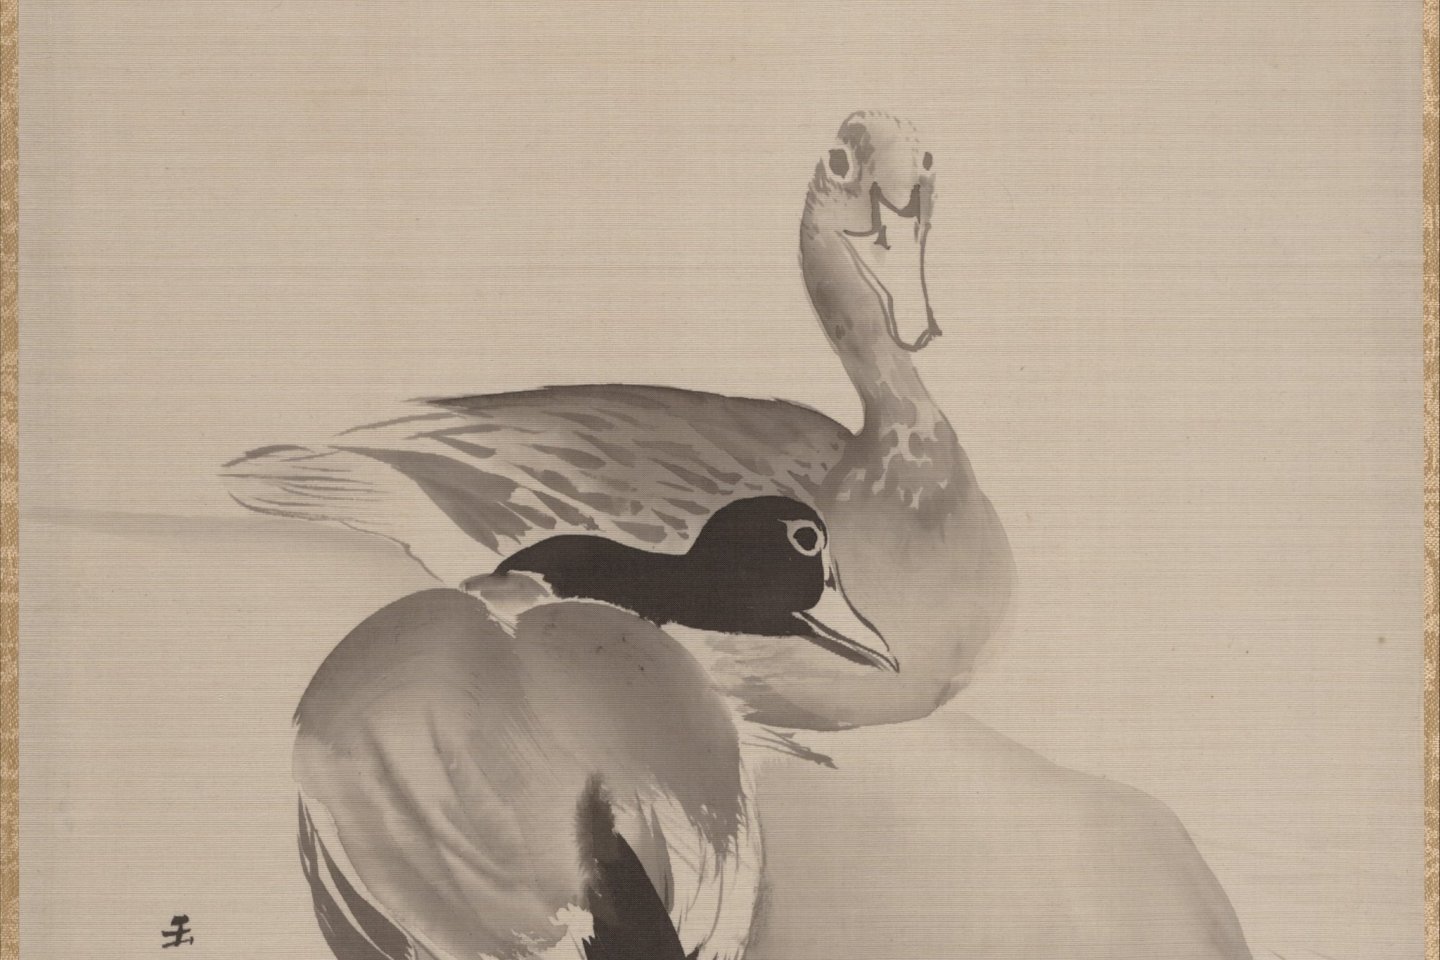 Kawabata Gyokushō was known for works depicting birdlife, some of which will be displayed at this event